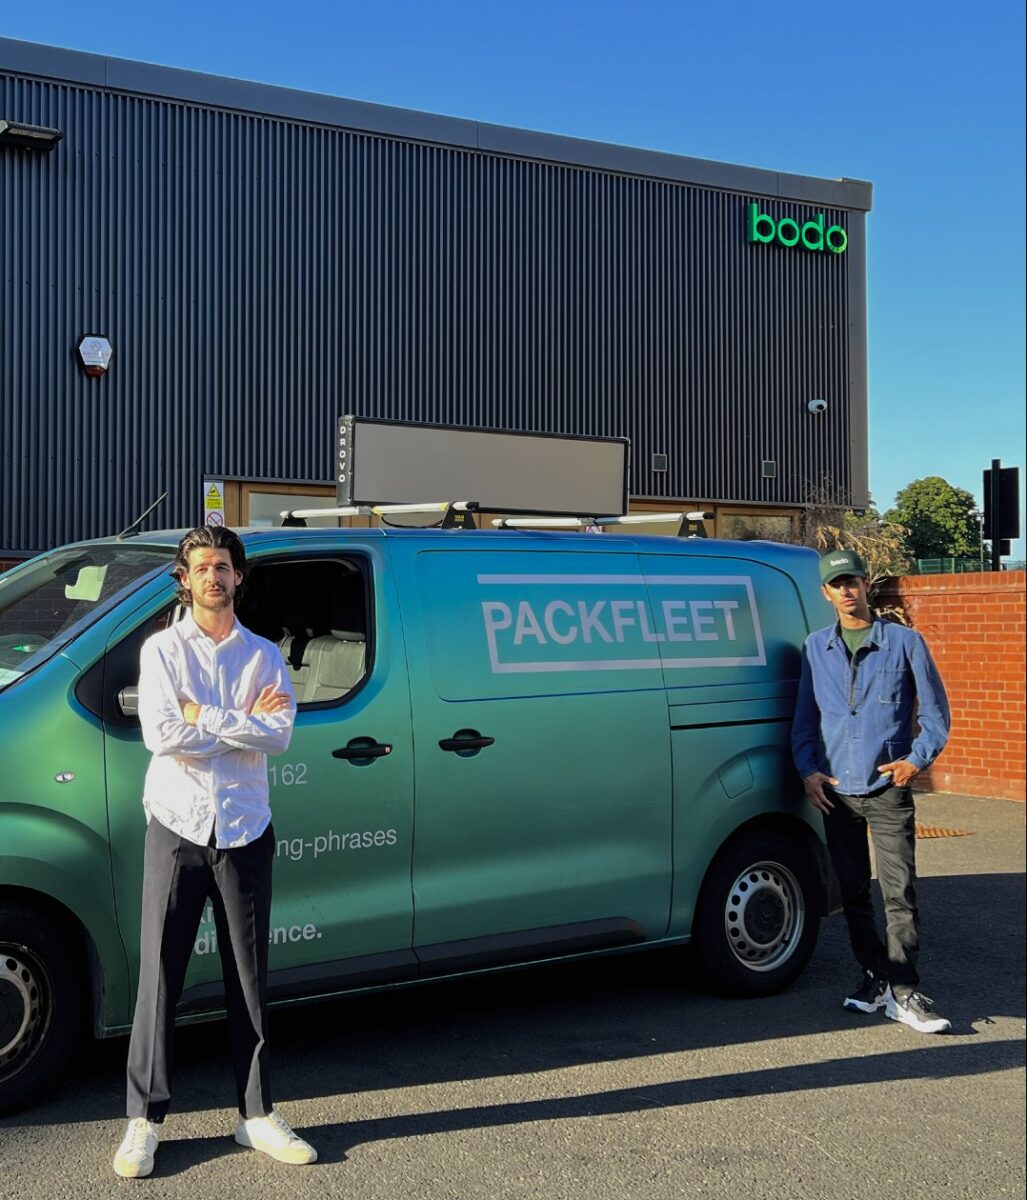 All-electric courier Packfleet is partnering with sustainable home delivery service bodo to help scale eco-friendly delivery services across London.